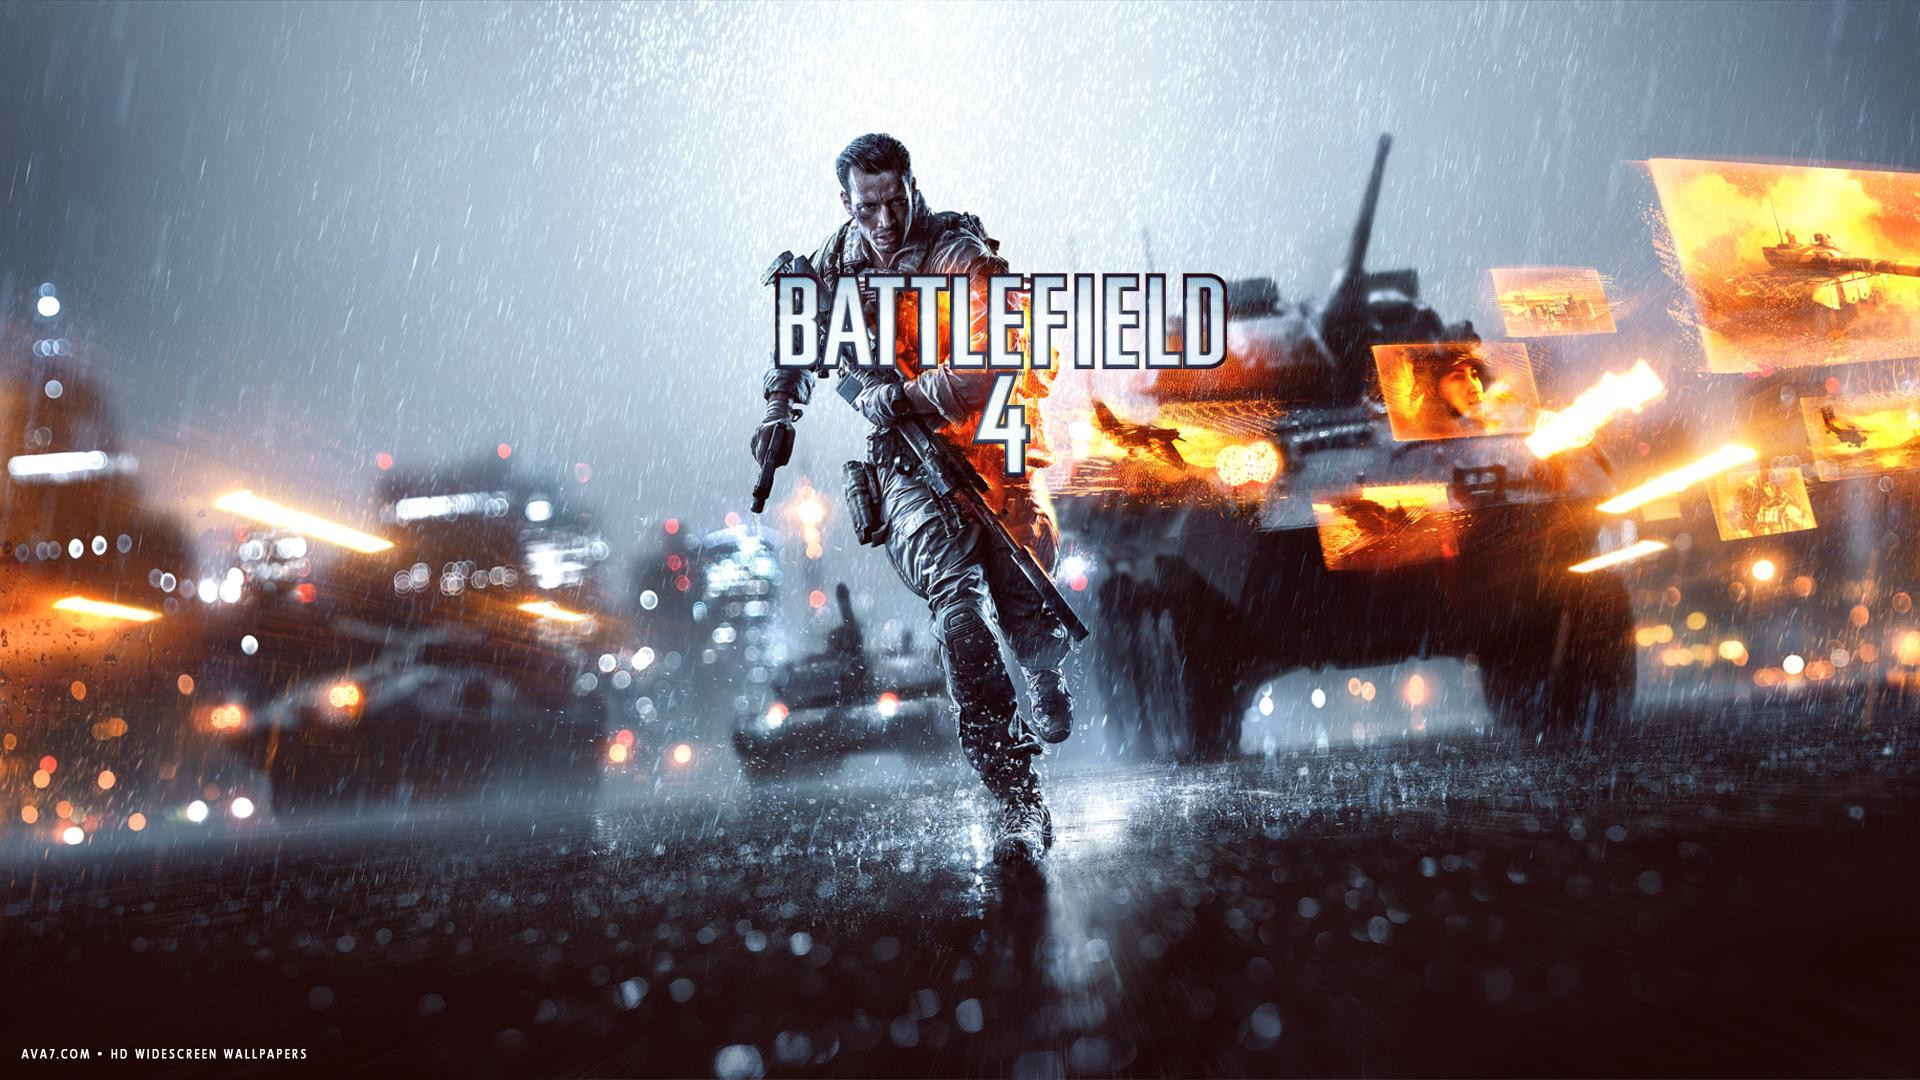  game bf4 fps artwork hd widescreen wallpaper games backgrounds 1920x1080